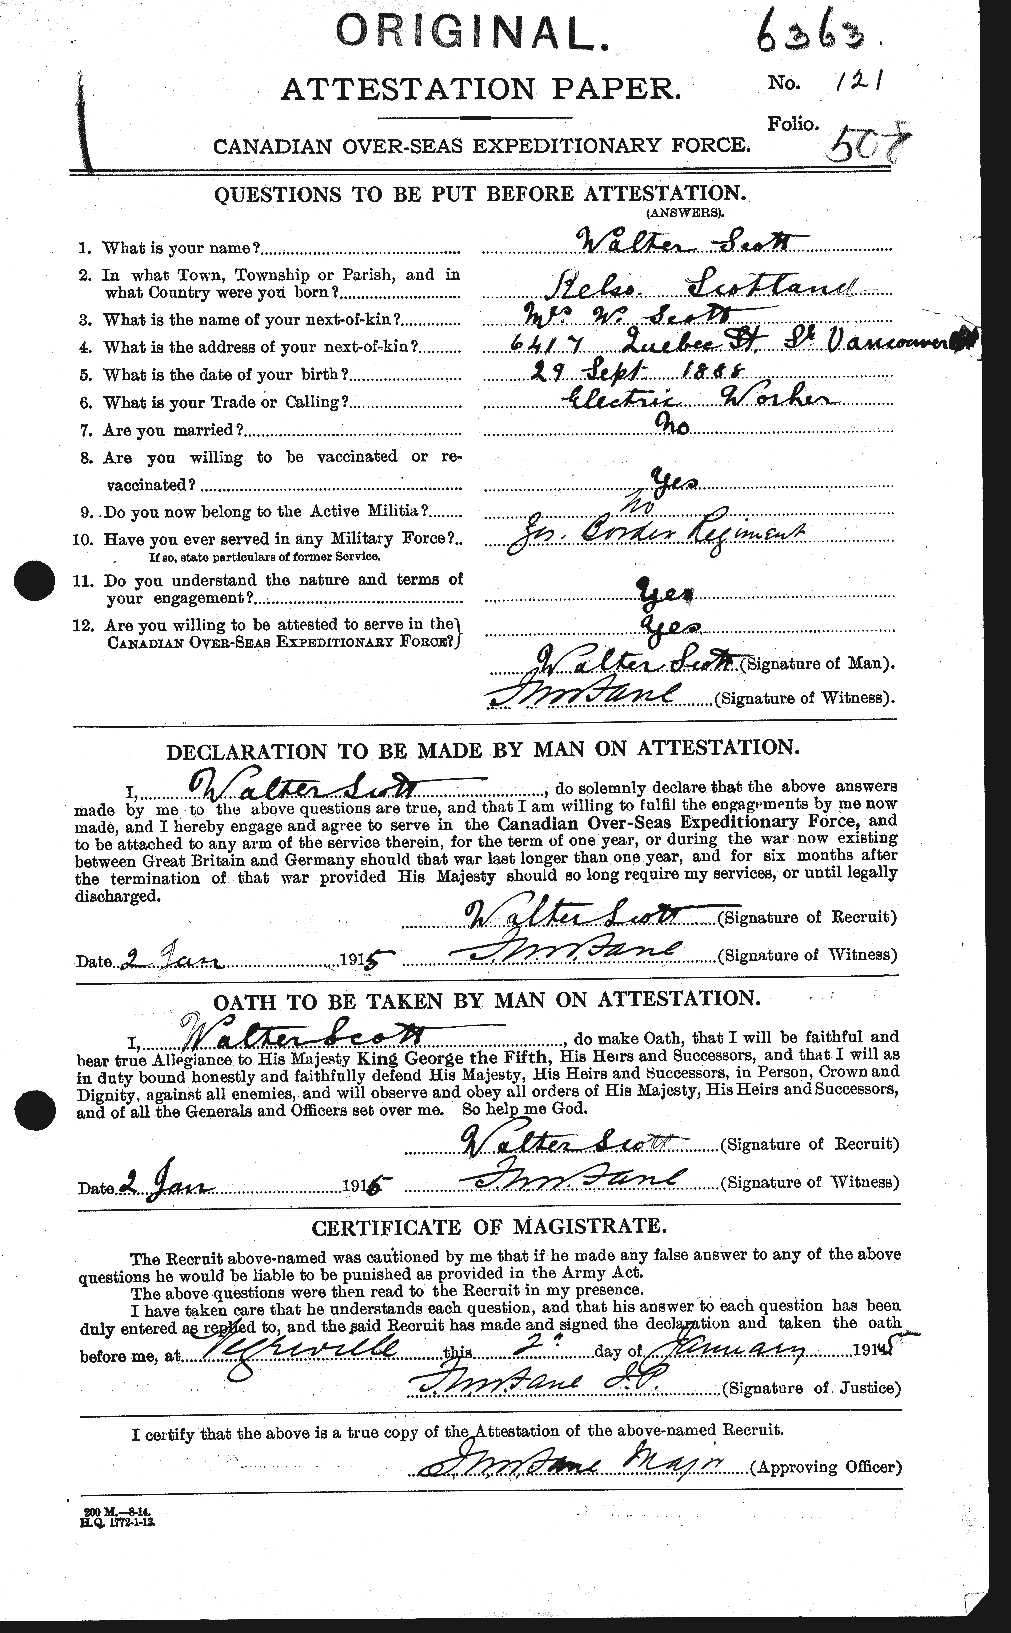 Personnel Records of the First World War - CEF 088185a